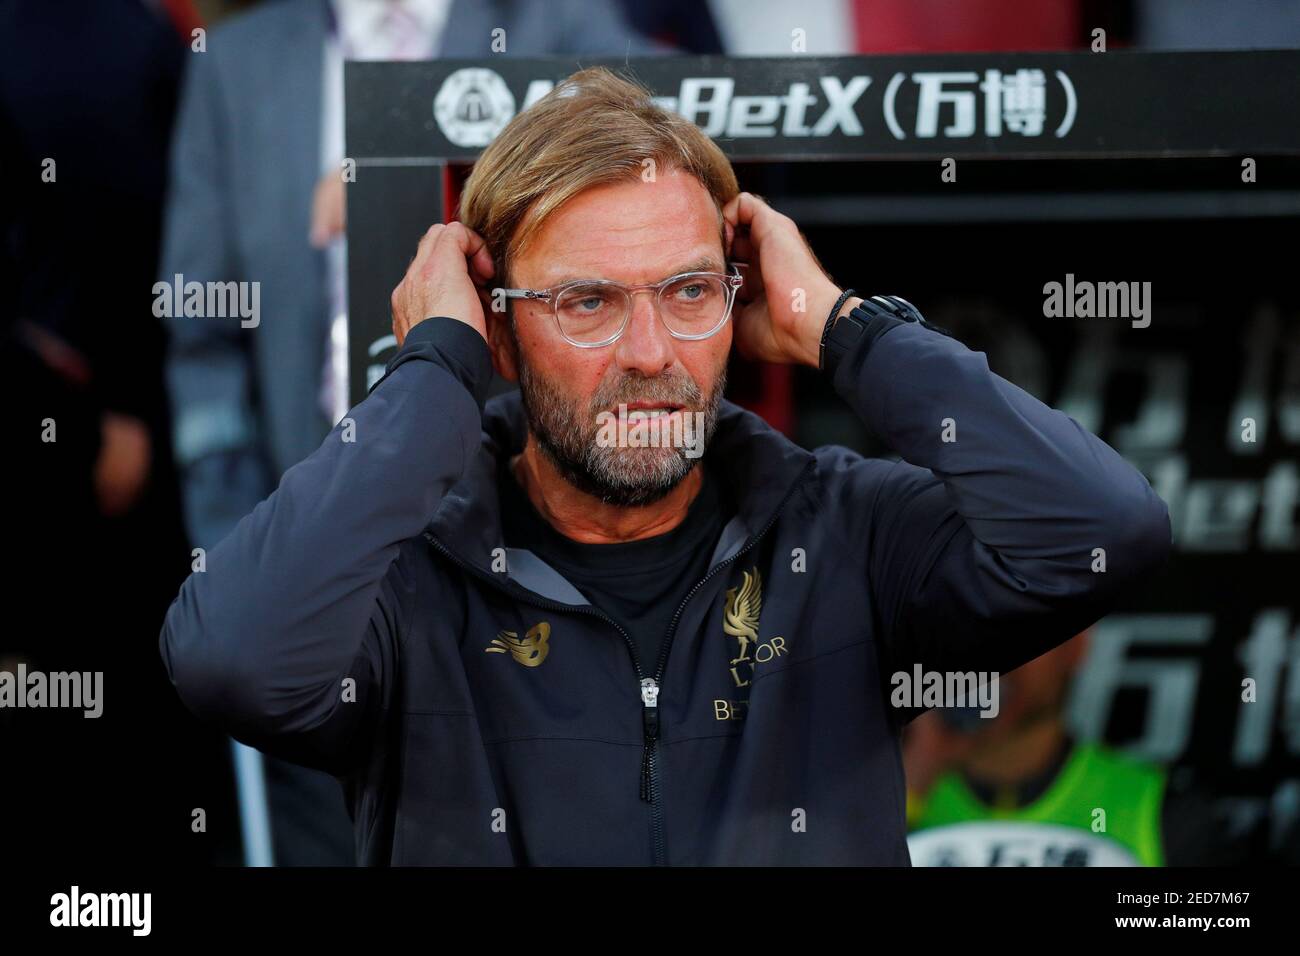 Soccer Football - Premier League - Crystal Palace v Liverpool - Selhurst Park, London, Britain - August 20, 2018  Liverpool manager Juergen Klopp before the match         REUTERS/Eddie Keogh  EDITORIAL USE ONLY. No use with unauthorized audio, video, data, fixture lists, club/league logos or 'live' services. Online in-match use limited to 75 images, no video emulation. No use in betting, games or single club/league/player publications.  Please contact your account representative for further details. Stock Photo